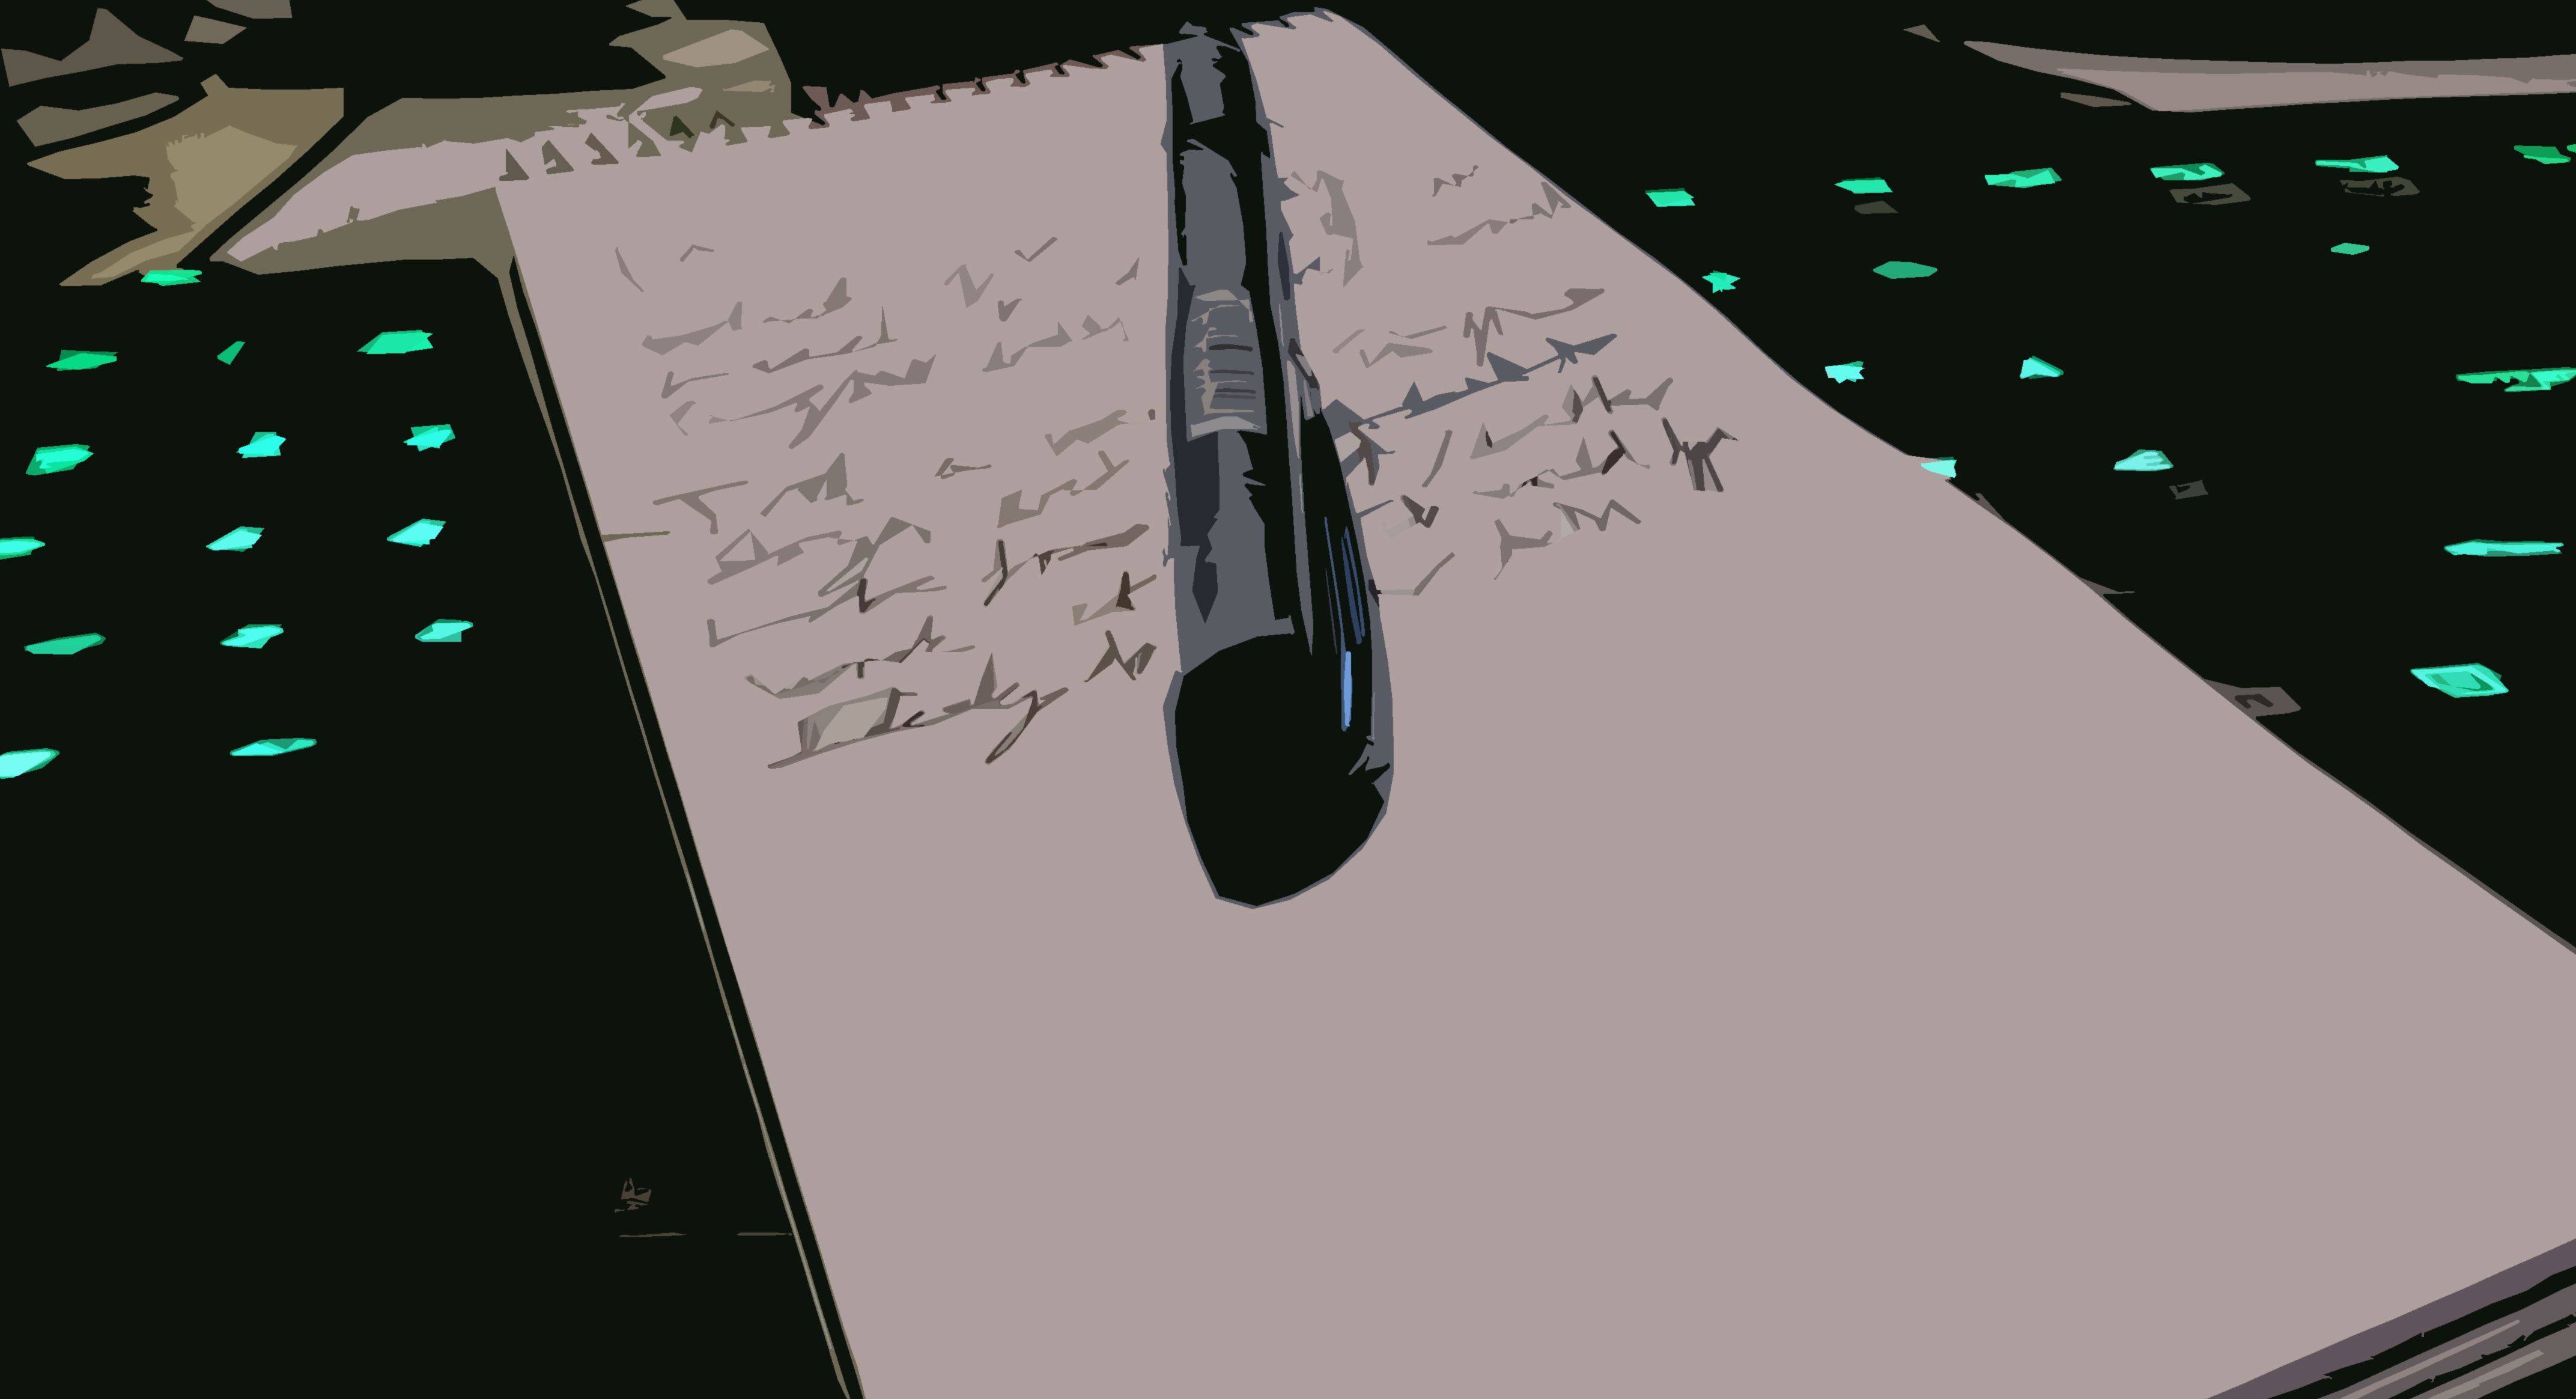 Notebook on keyboard, photographed and edited by Fredrik Walløe